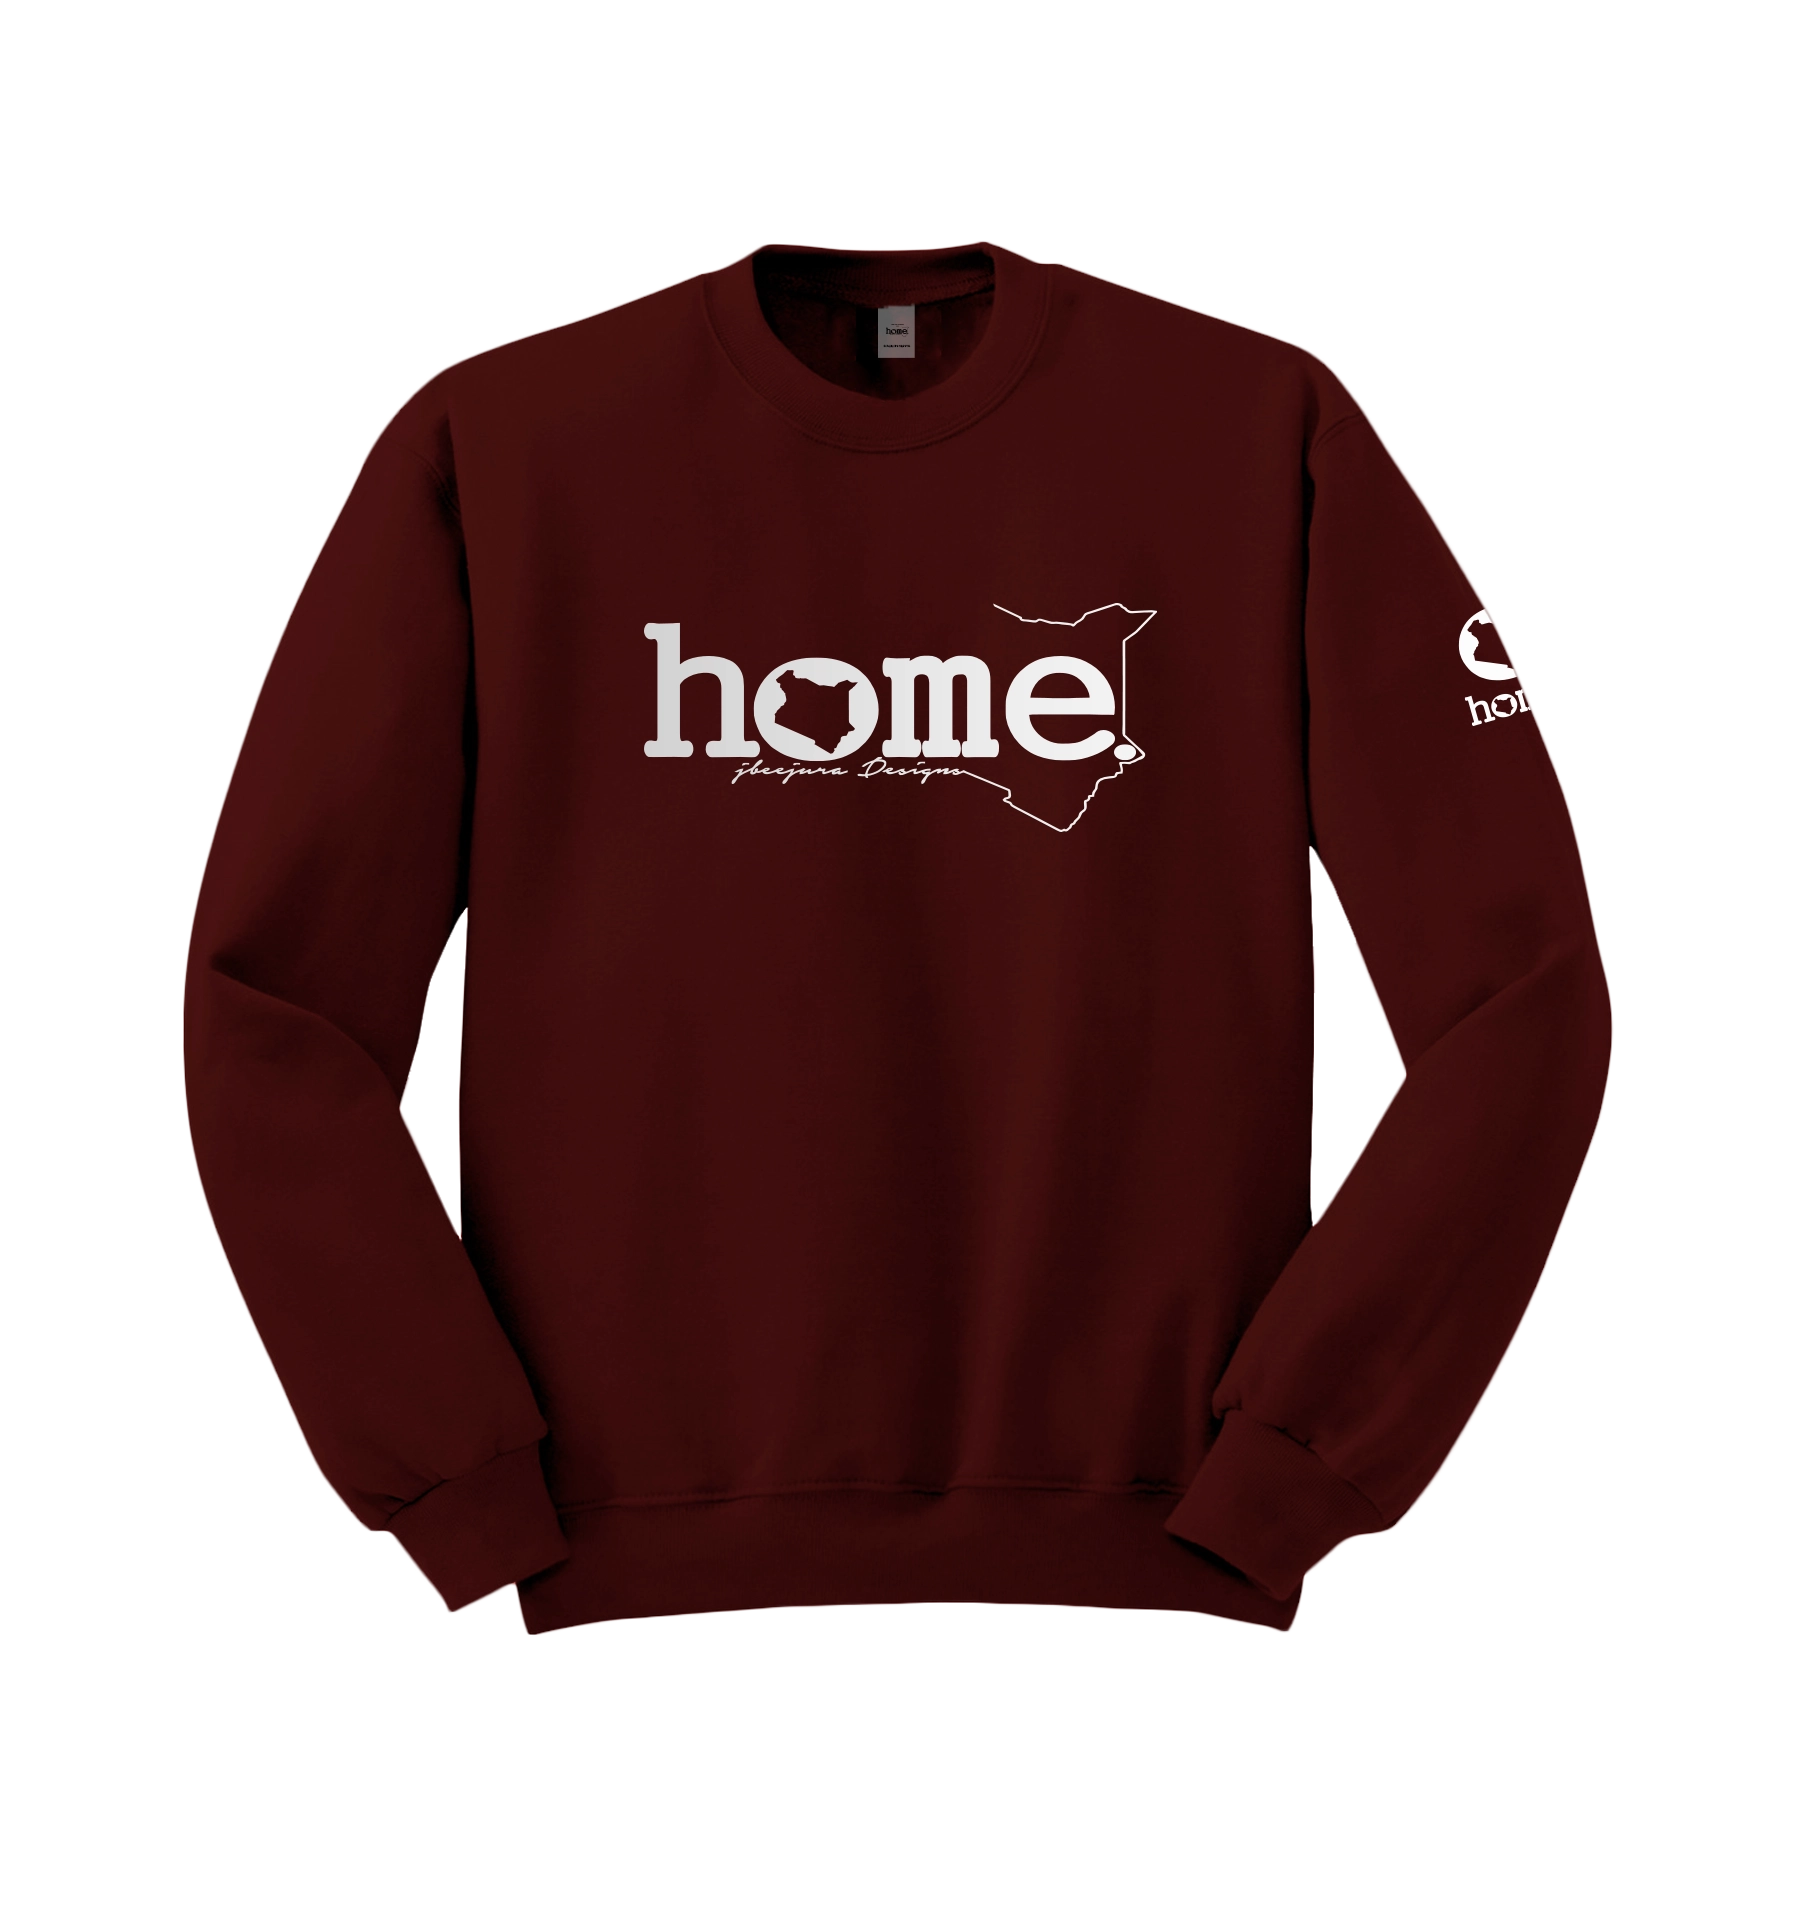 home_254 MAROON SWEATSHIRT (MID-HEAVY FABRIC) WITH A SILVER WORDS PRINT